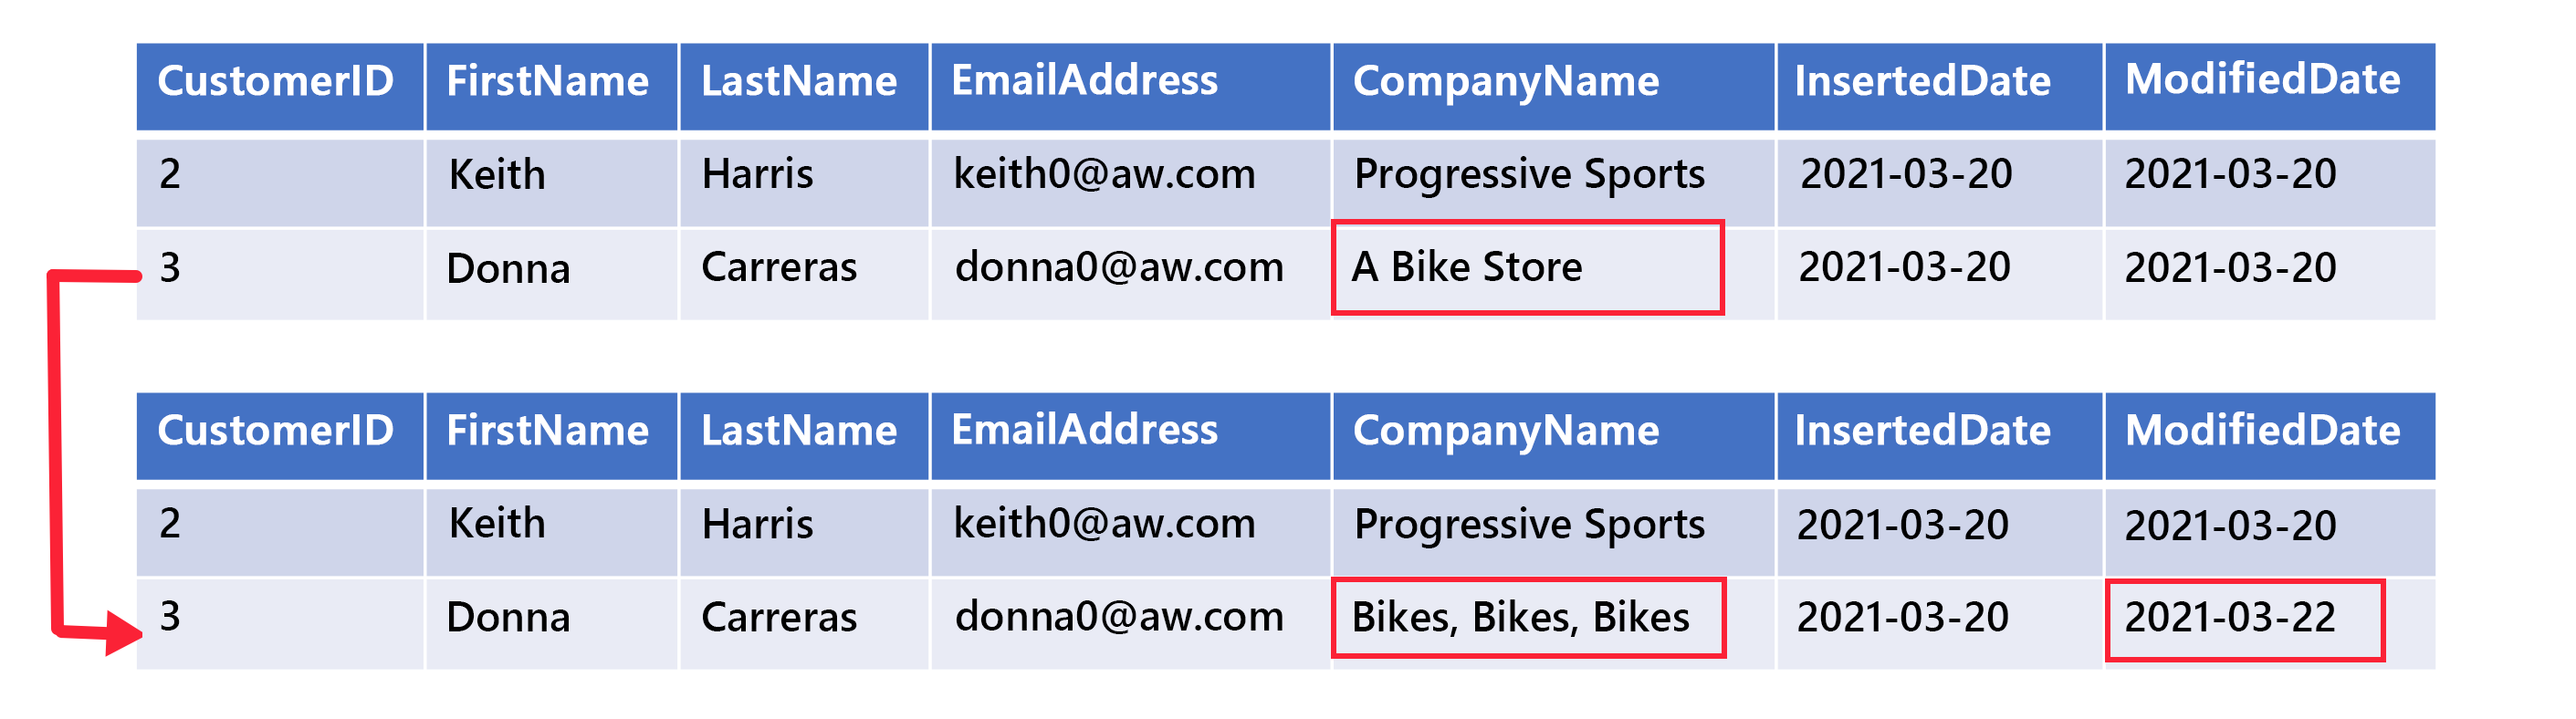 An example Type 1 SCD row that updates CompanyName and ModifiedDate.